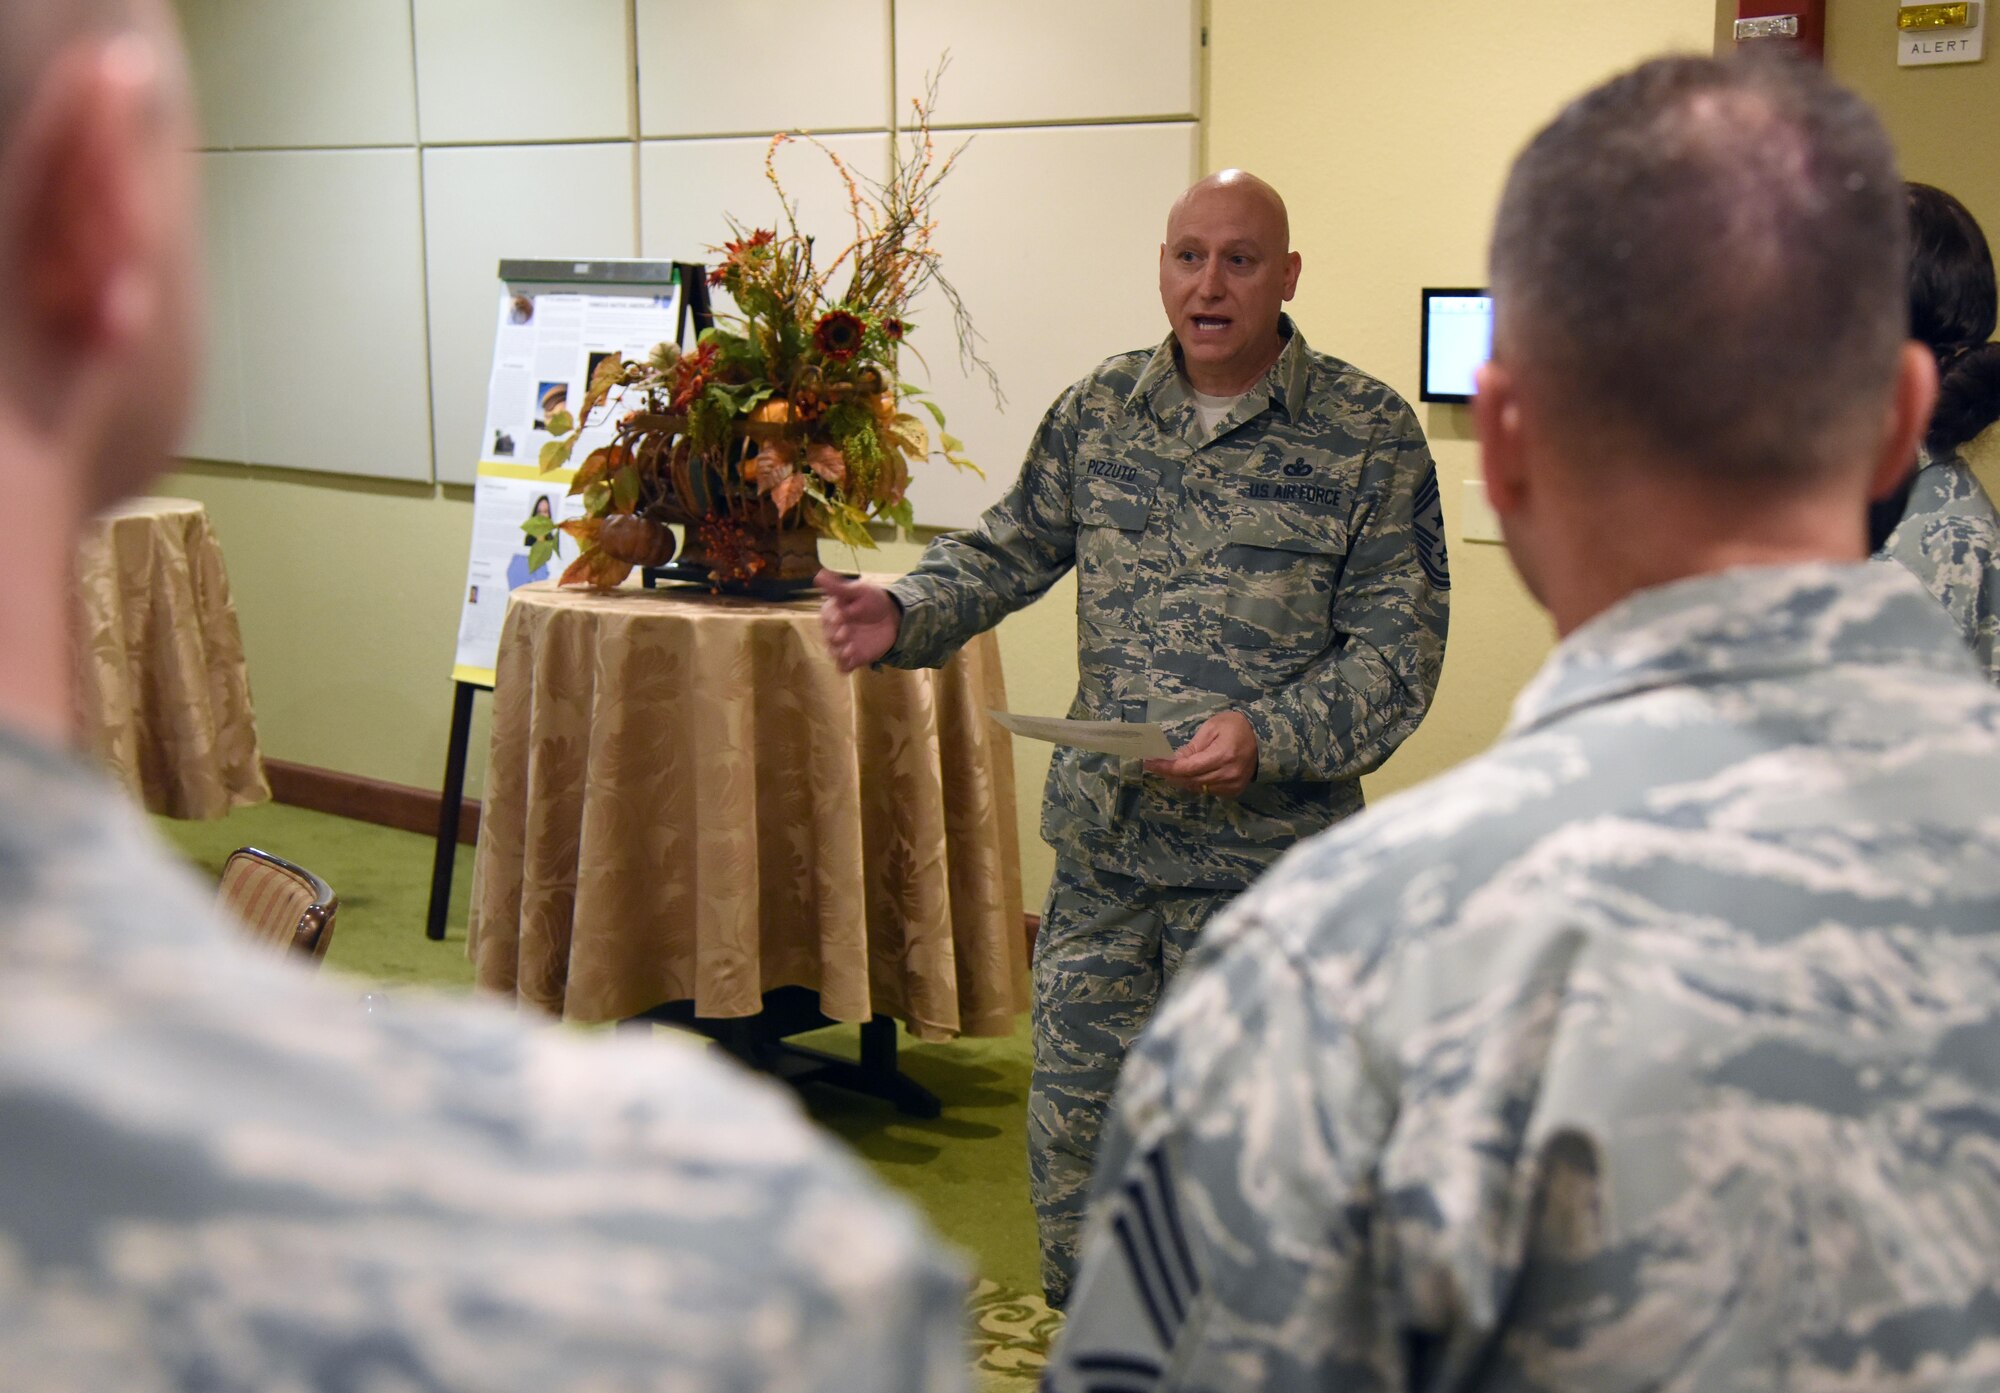 U.S. Air Force Chief Master Sgt. David Pizzuto, 81st Training Wing command chief, delivers remarks during the Native American Heritage Month food tasting at Keesler Air Force Base, Mississippi, Nov. 29, 2018. The event was held in celebration of Native American Heritage Month. (U.S. Air Force photo by Kemberly Groue)